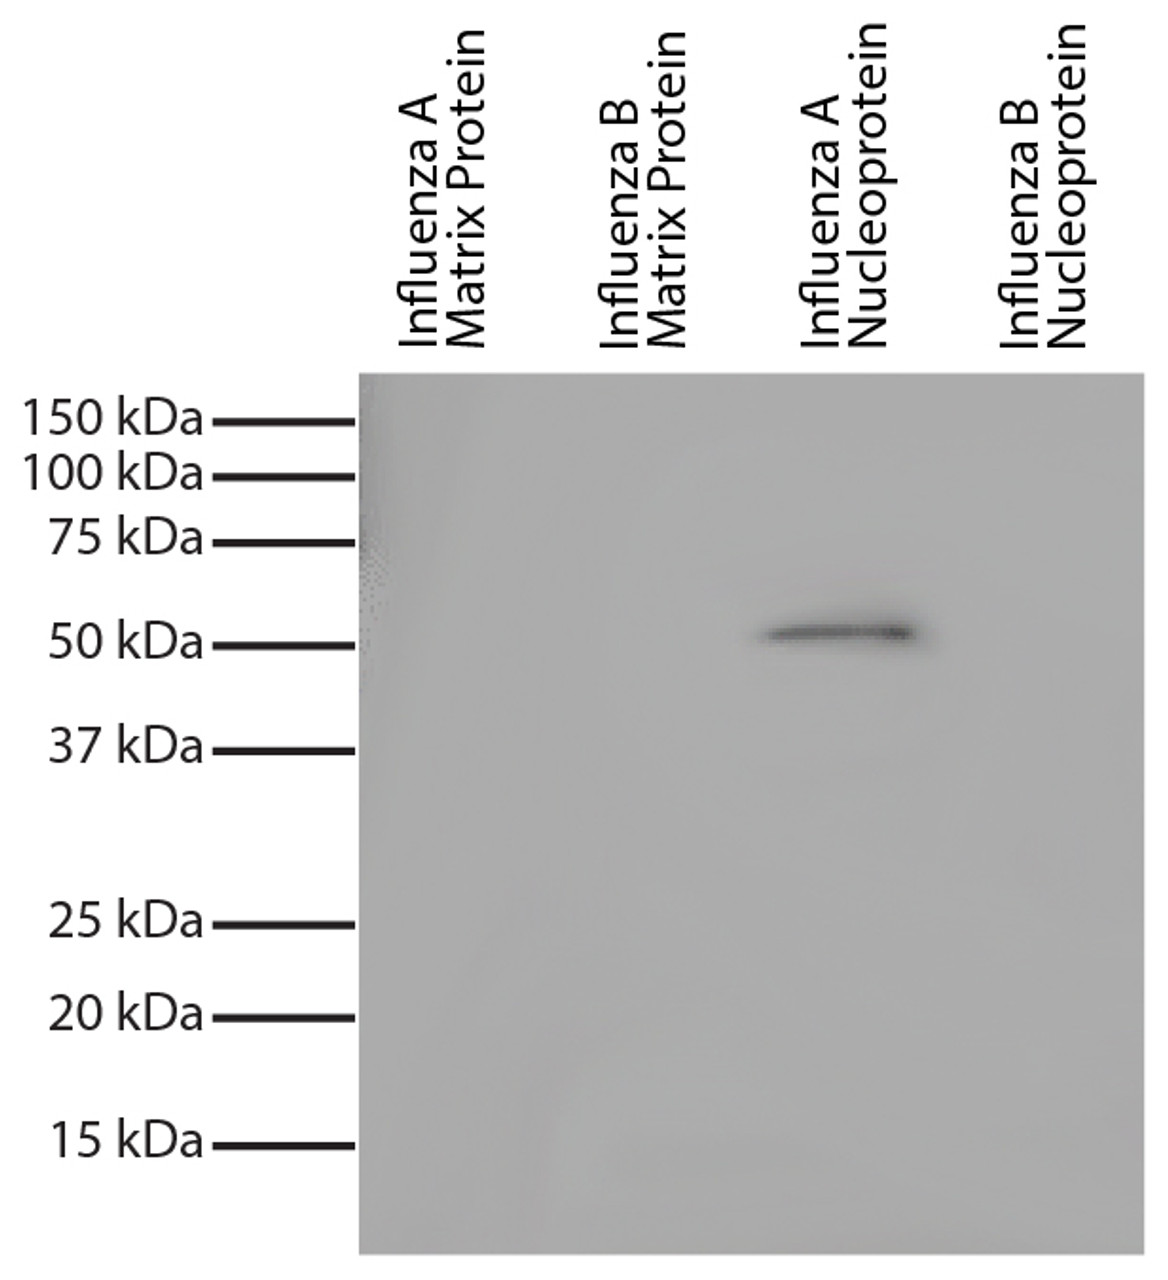 Recombinant influenza proteins were resolved by electrophoresis, transferred to PVDF membrane, and probed with Mouse Anti-Influenza A, Nucleoprotein-UNLB (Cat. No. 99-733) . Proteins were visualized using Goat Anti-Mouse IgG, Human ads-HRP and with chemiluminescent detection.